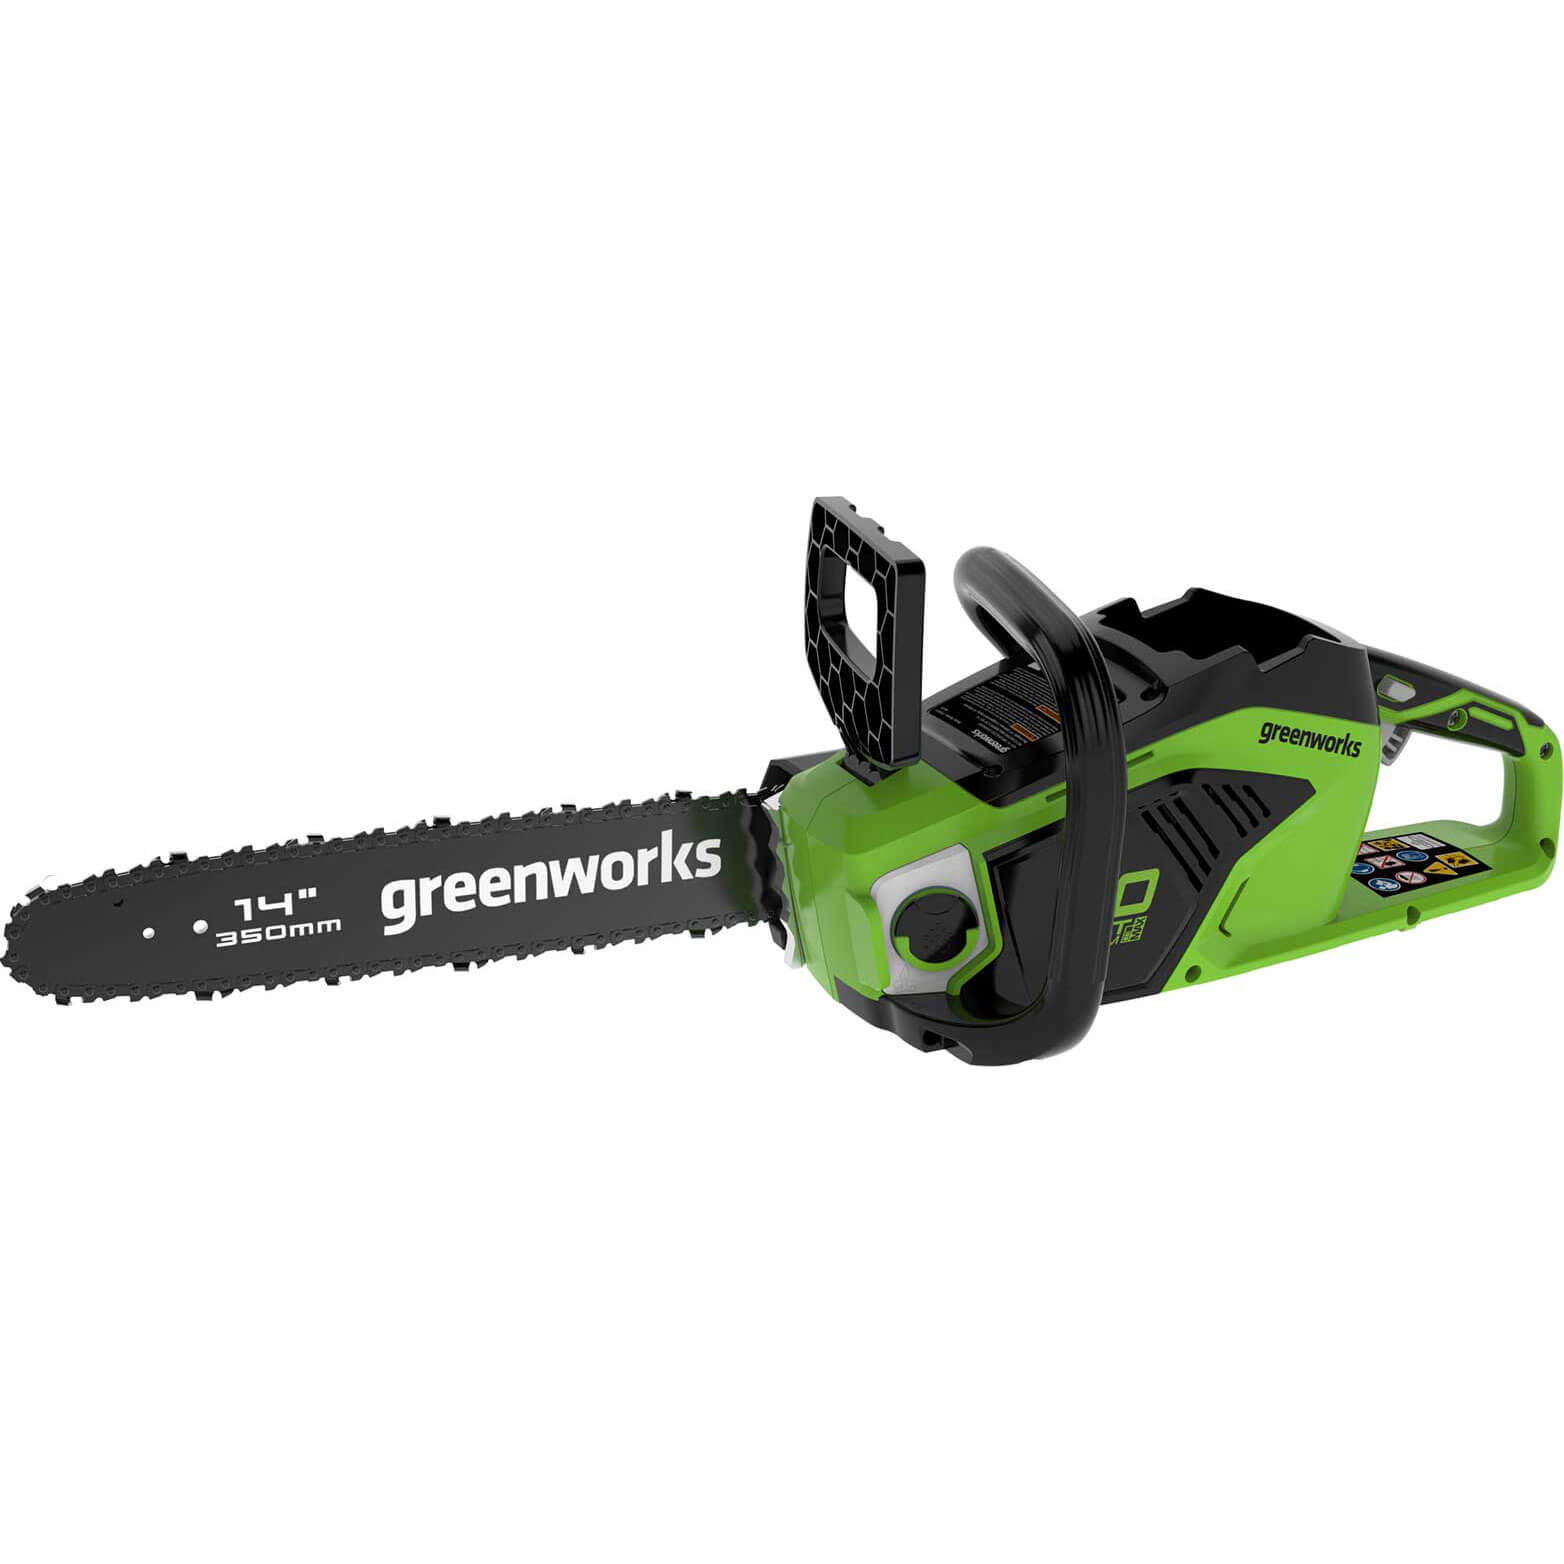 Greenworks GD40CS15 40v Cordless Brushless Chainsaw 350mm No Batteries No Charger